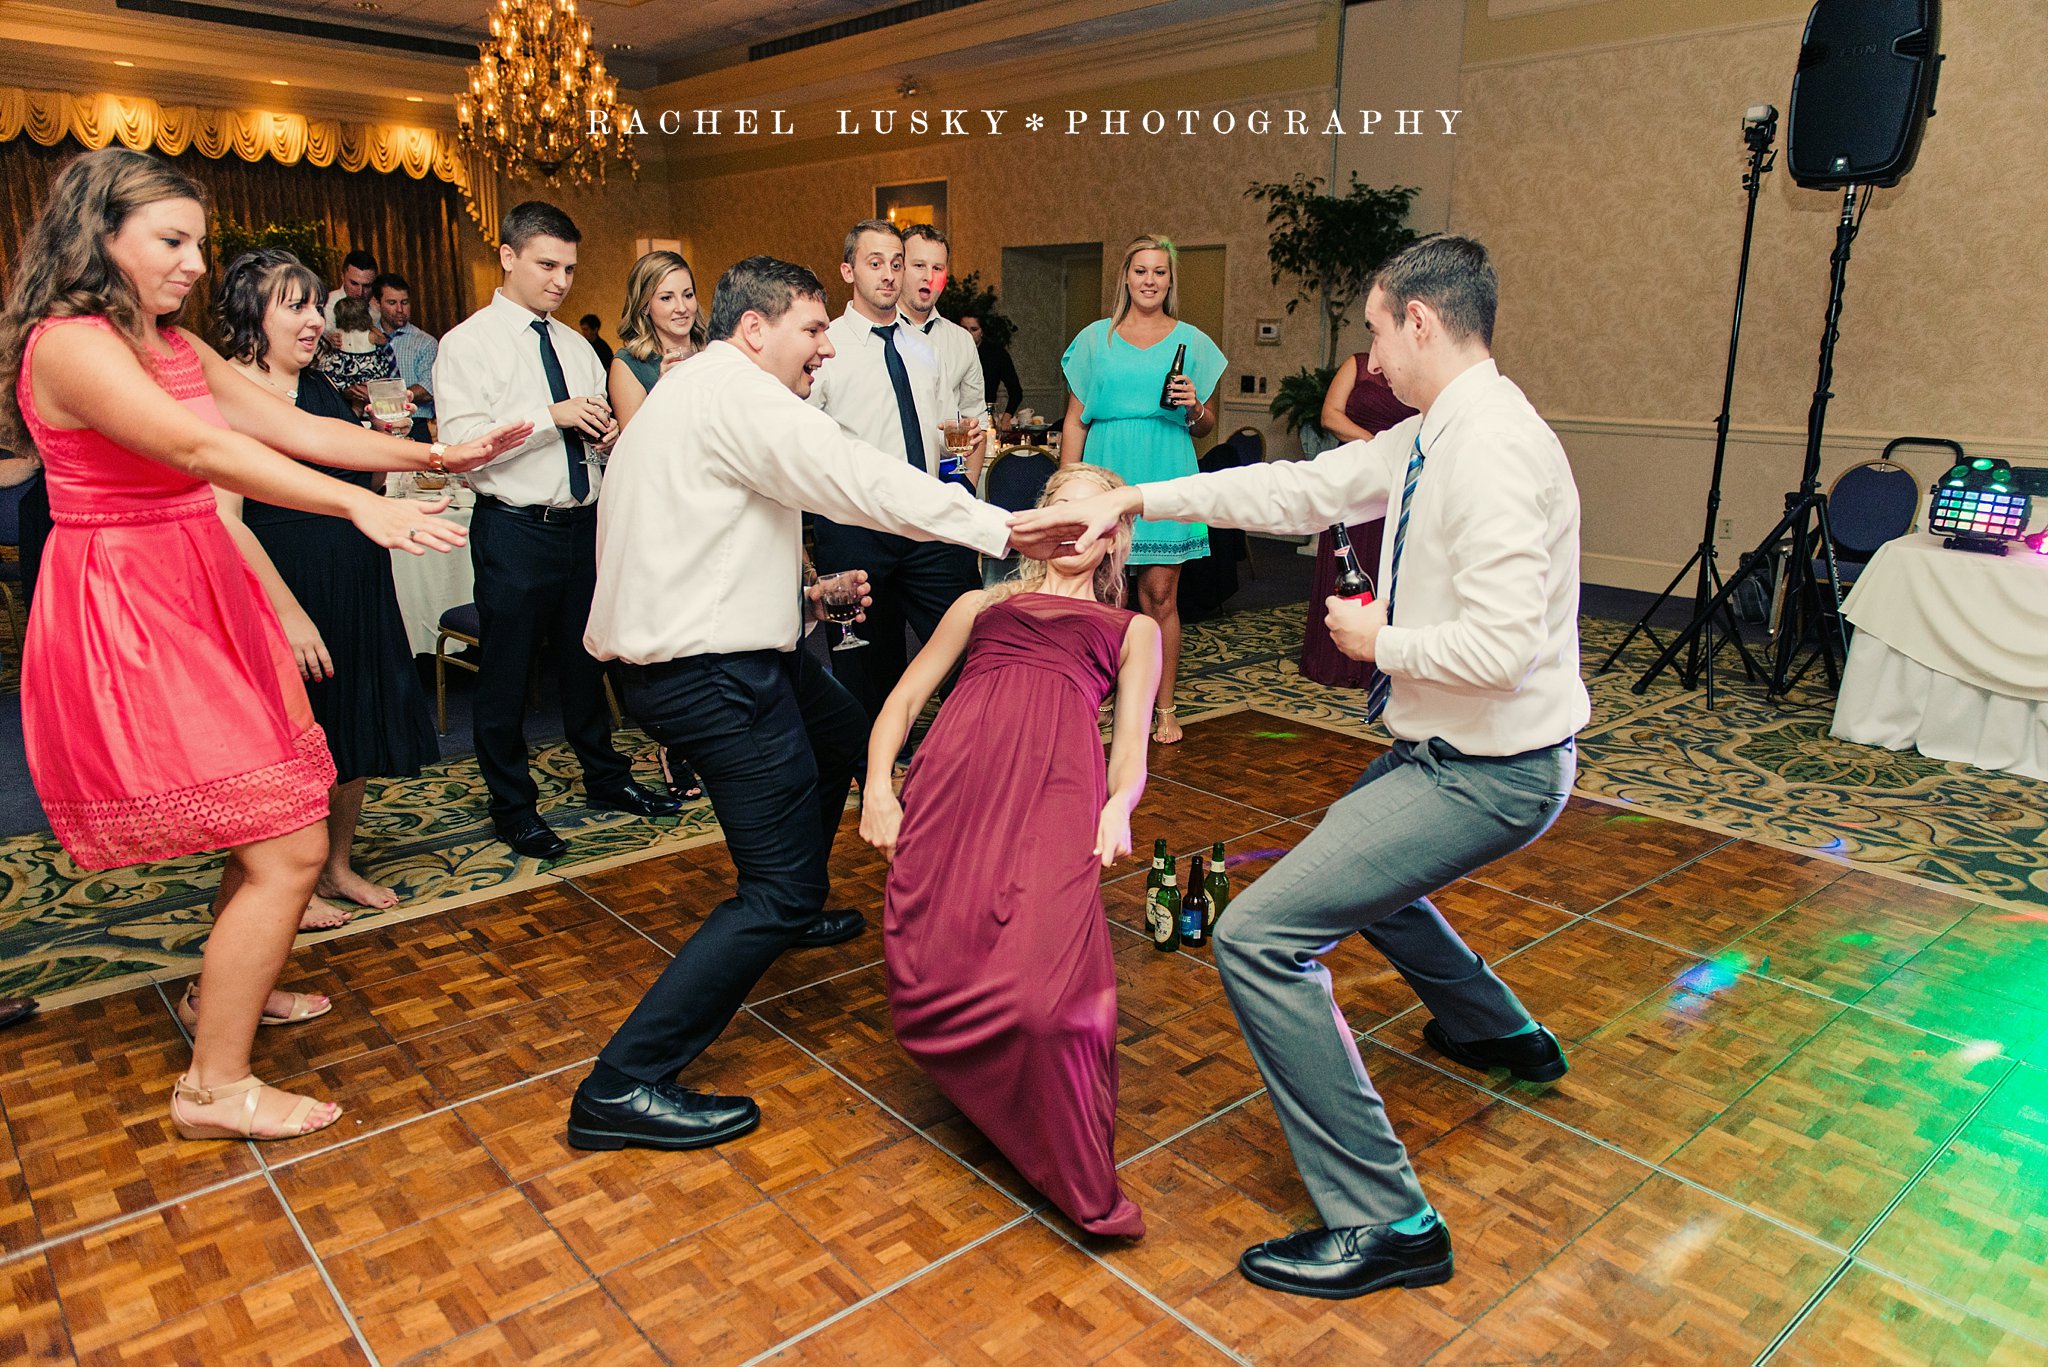 Bel-Aire Clarion Hotel, Erie PA Wedding Photography